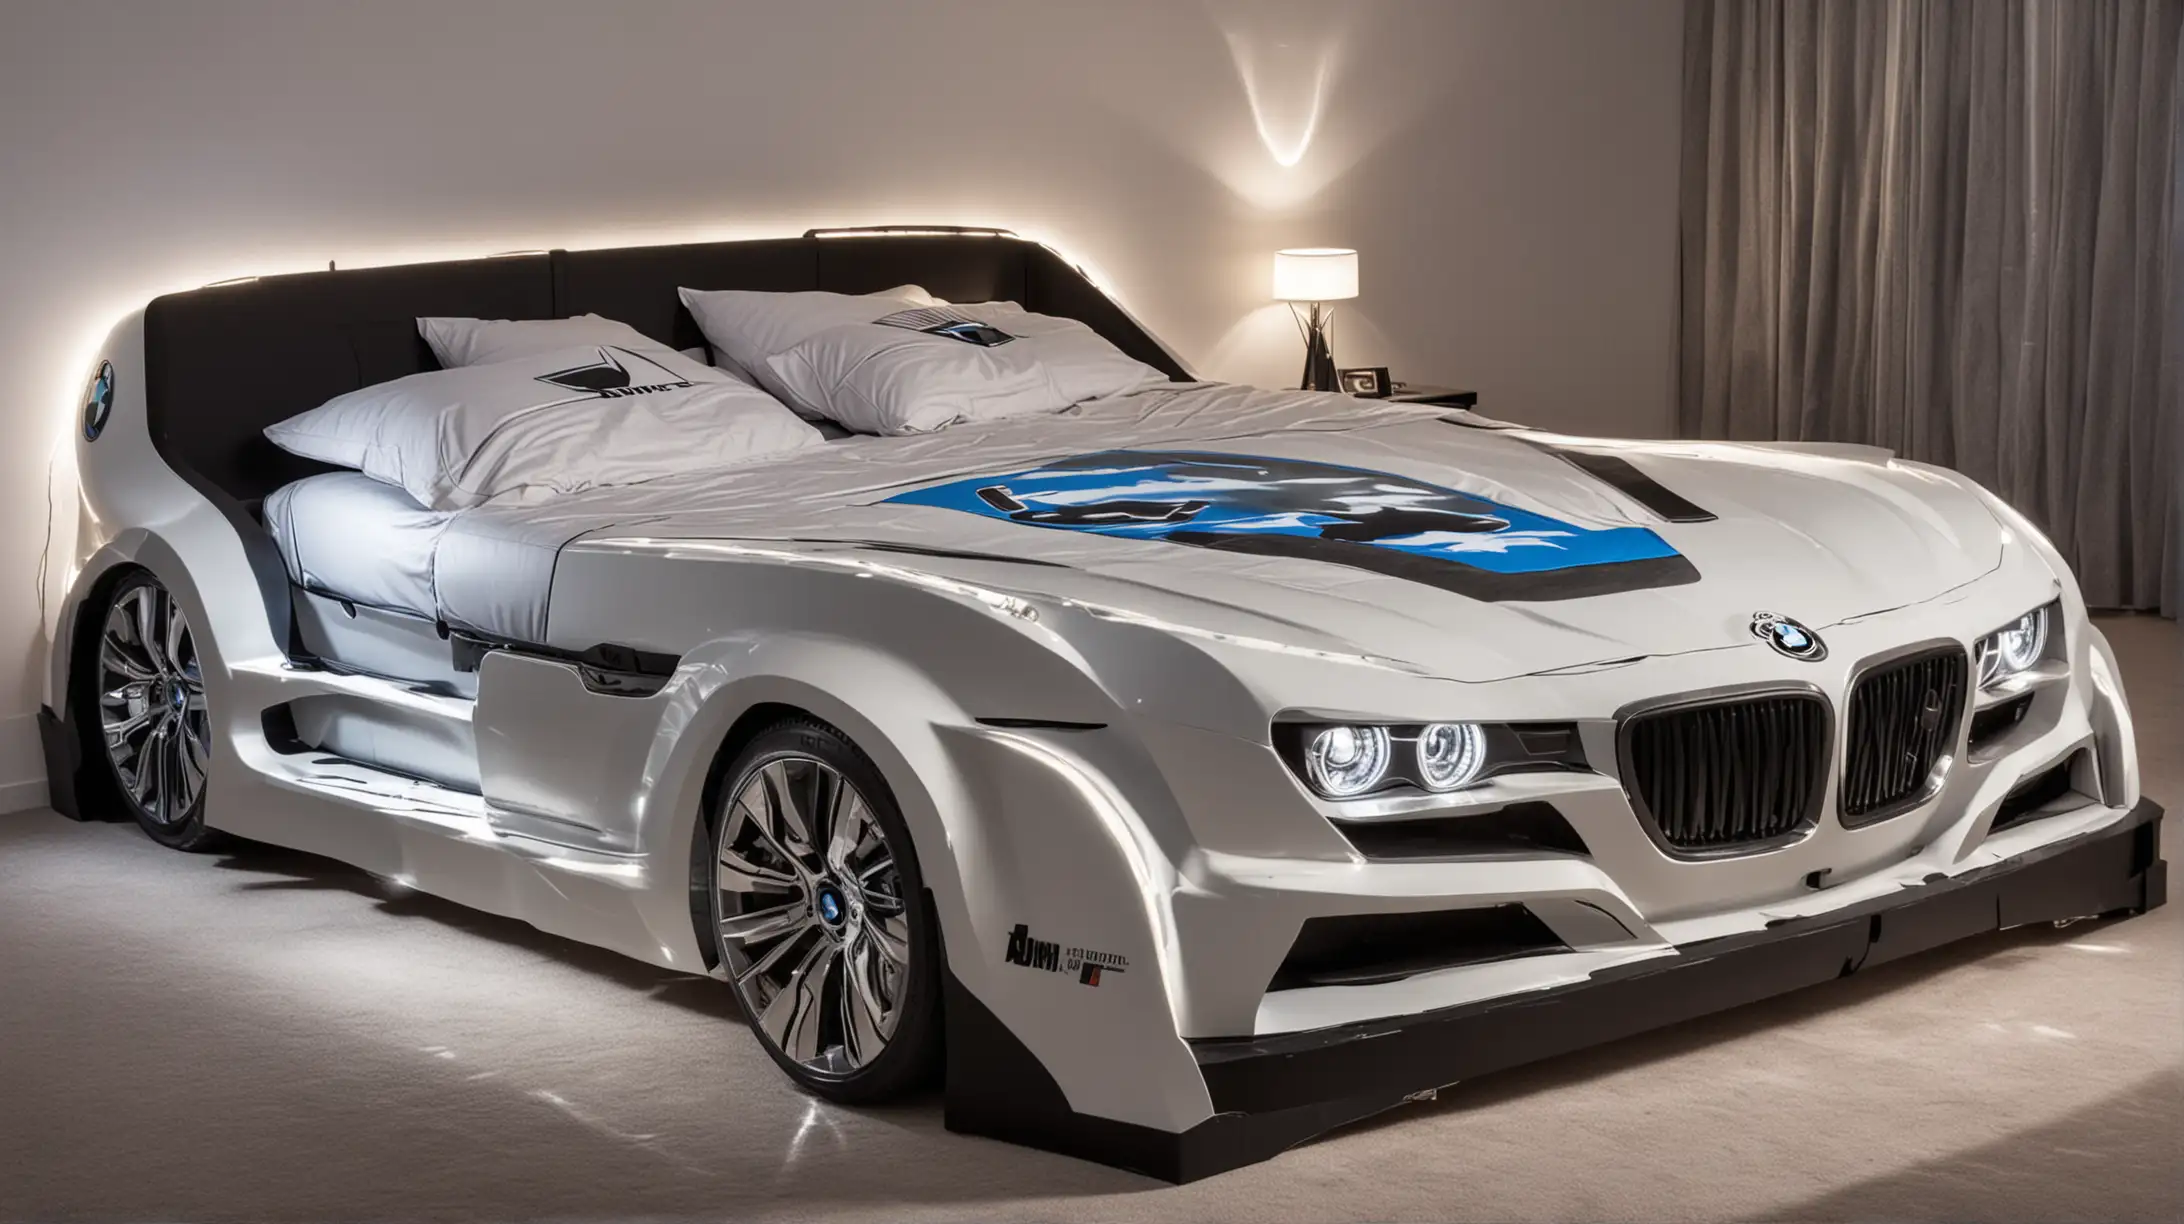 Double bed in the shape of a BMW car with headlights on and Lightning graphics